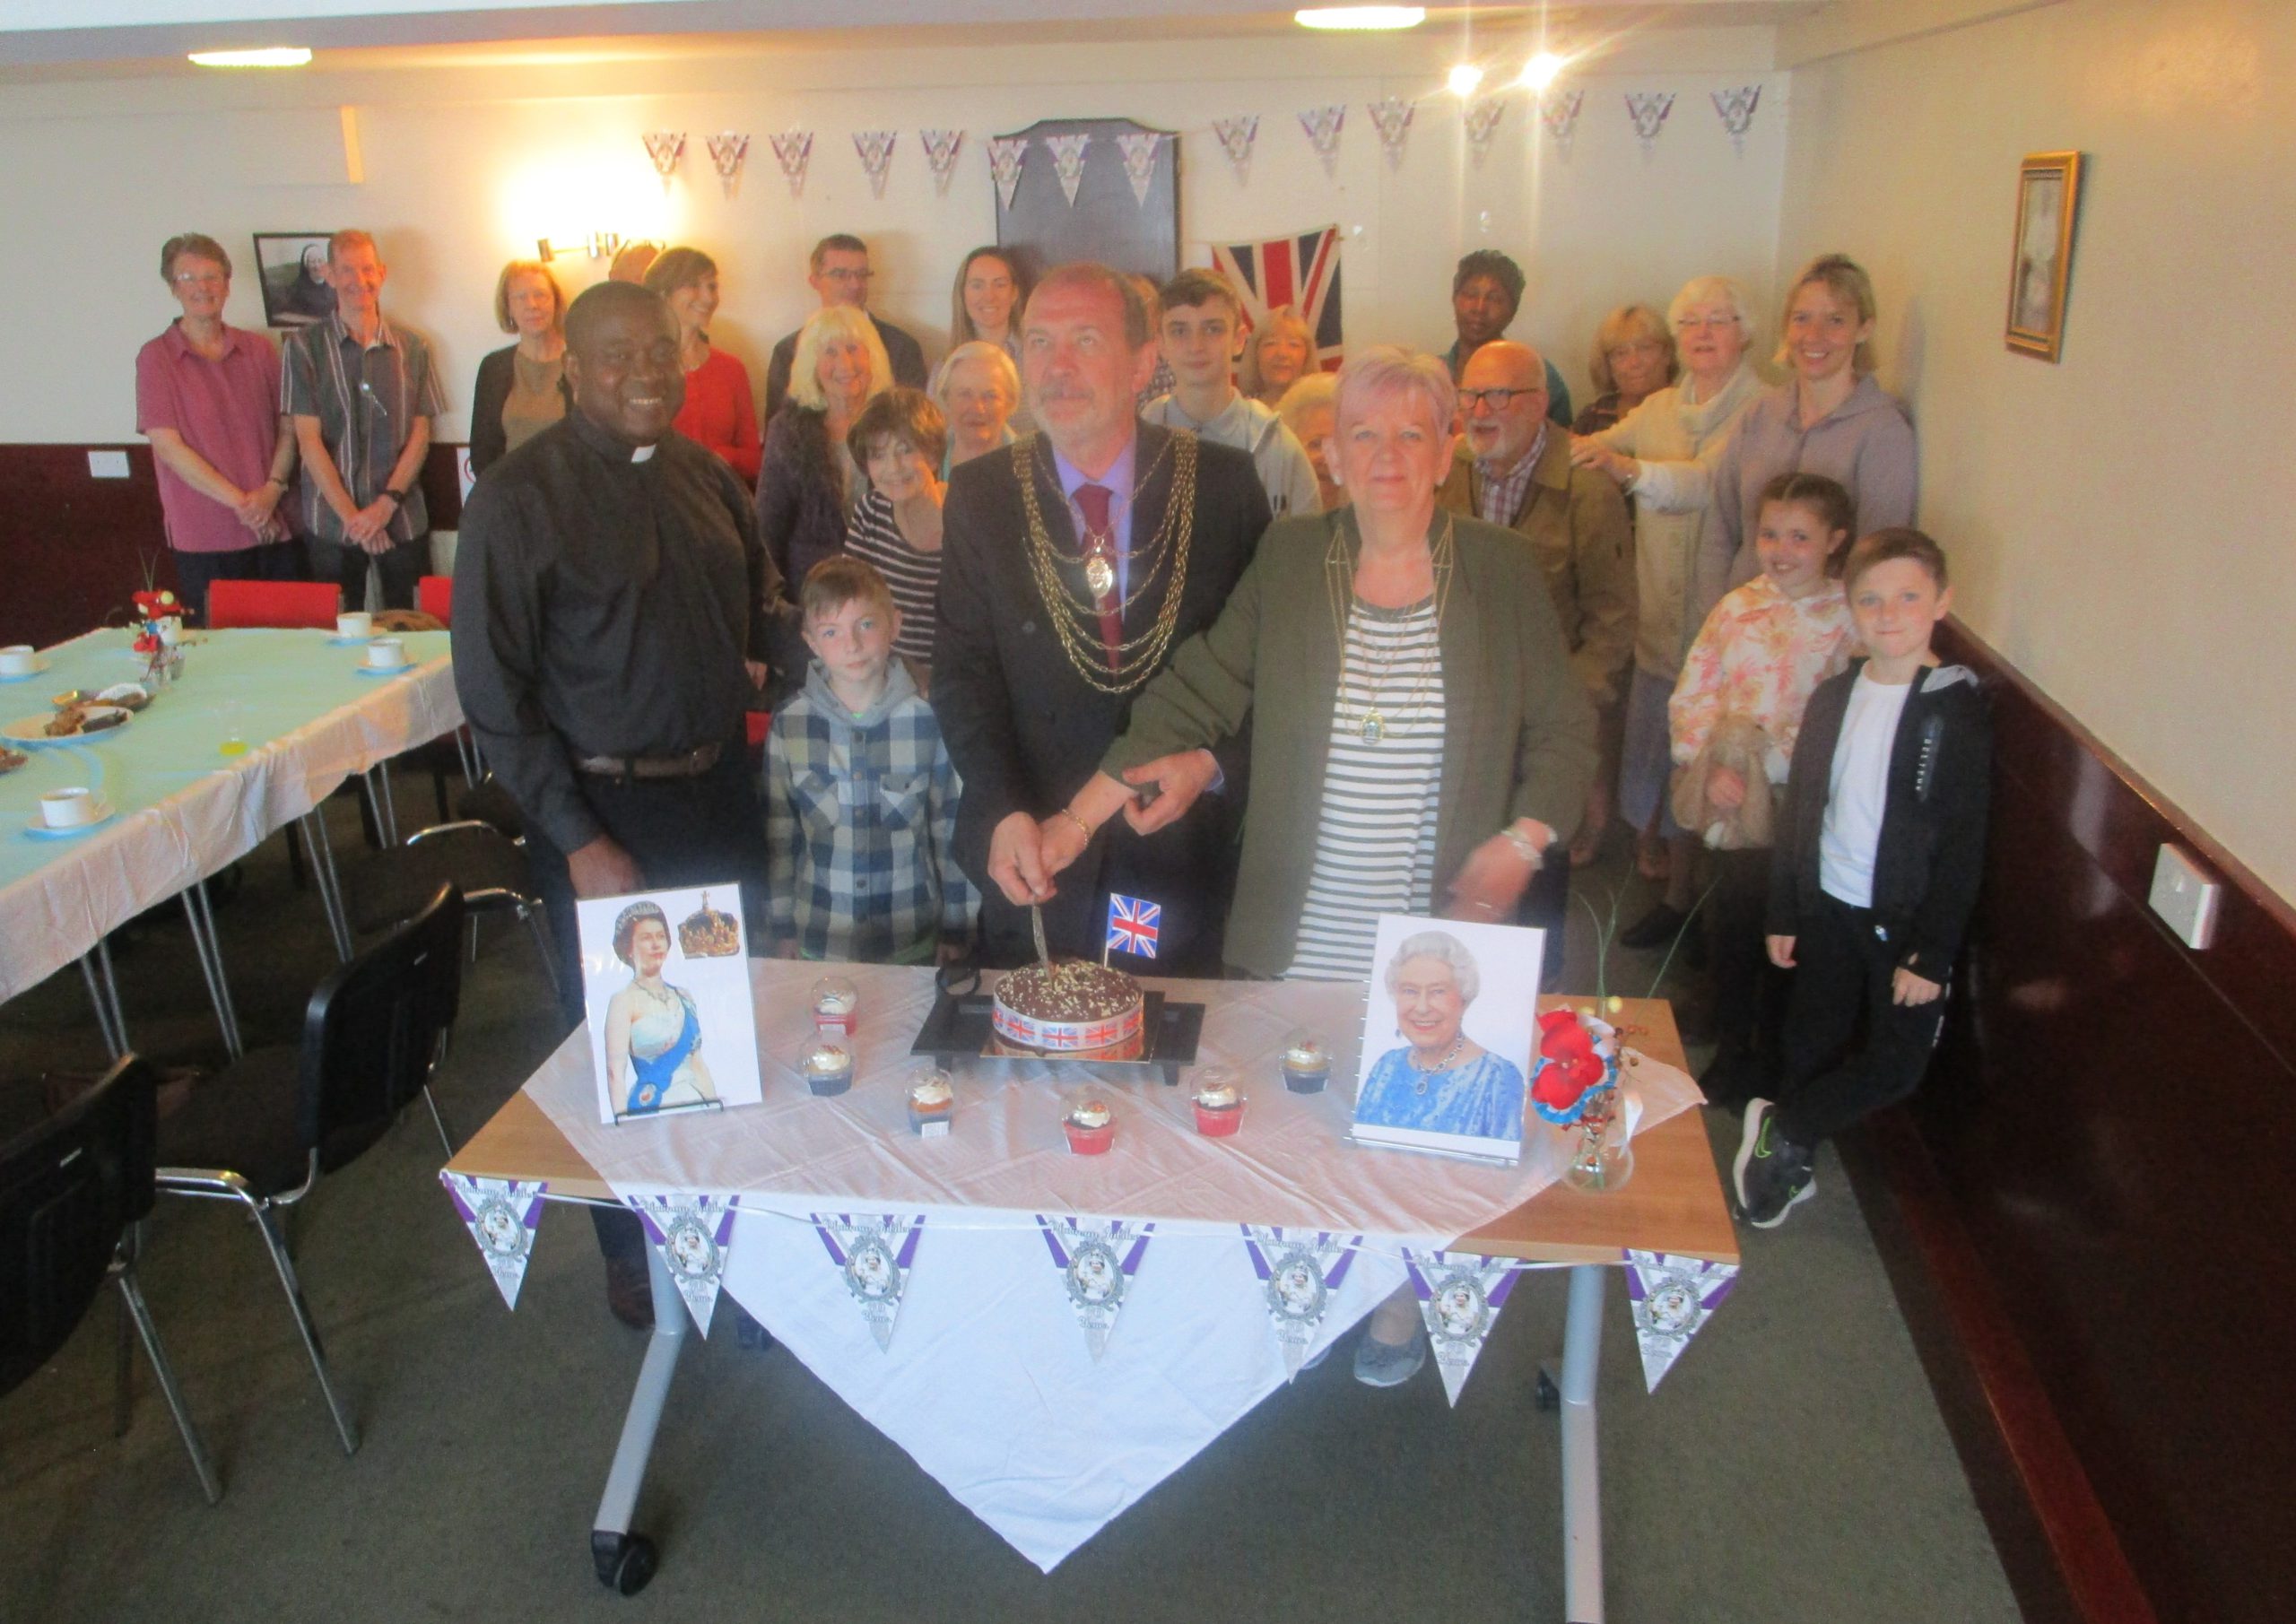 Councillor Ian Pearson, Civic Mayor of Doncaster, cutting the Platinum Jubilee cake pictured with Fr Desmond, Sue Pearson, Civic Mayoress of Doncaster, and parishioners.